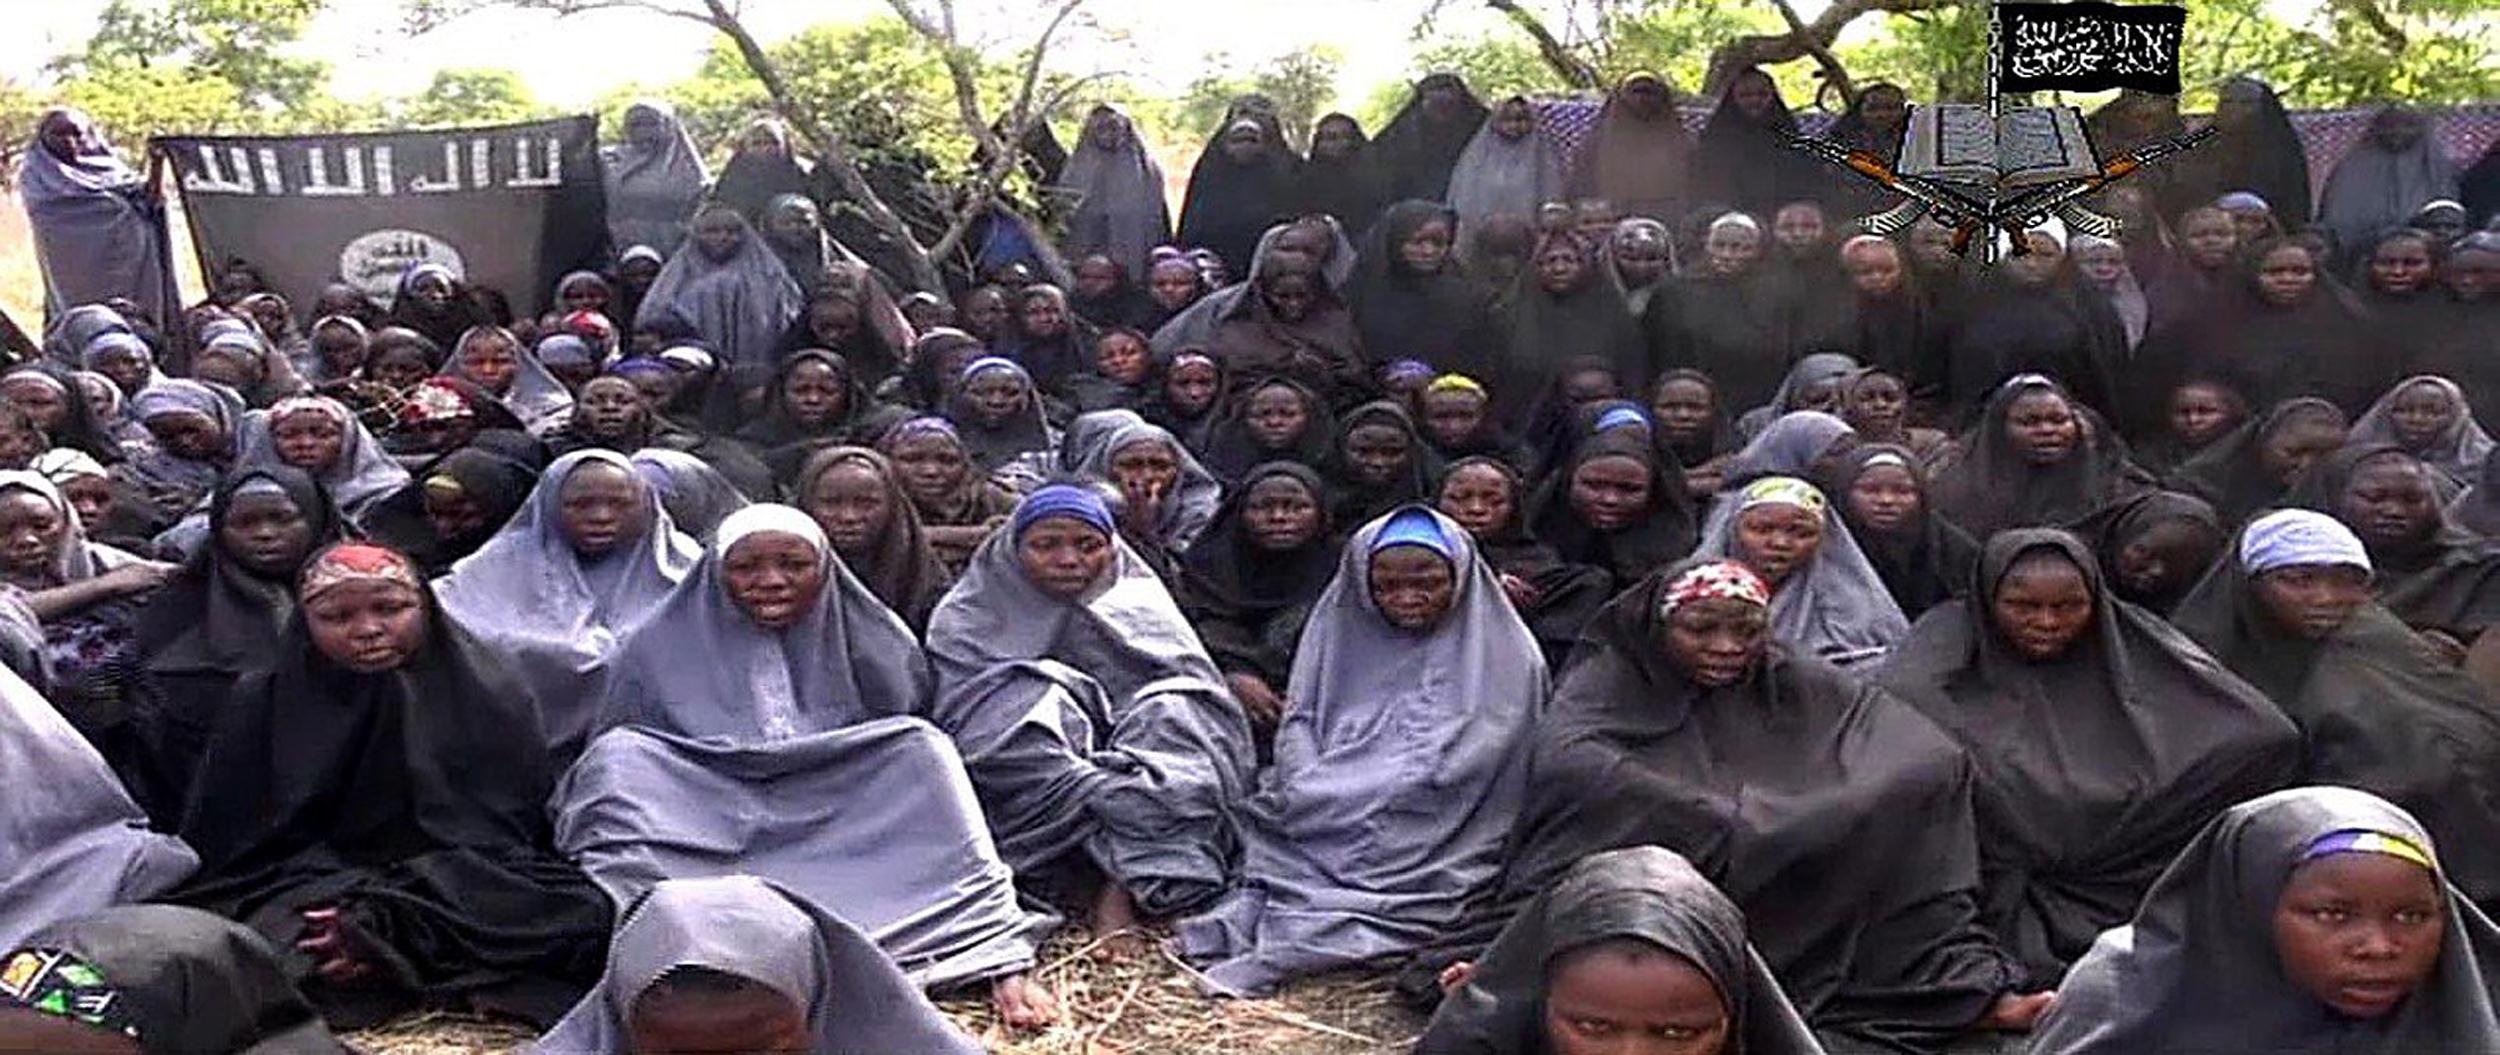 boko-haram-abducted-children-forget-their-own-identities